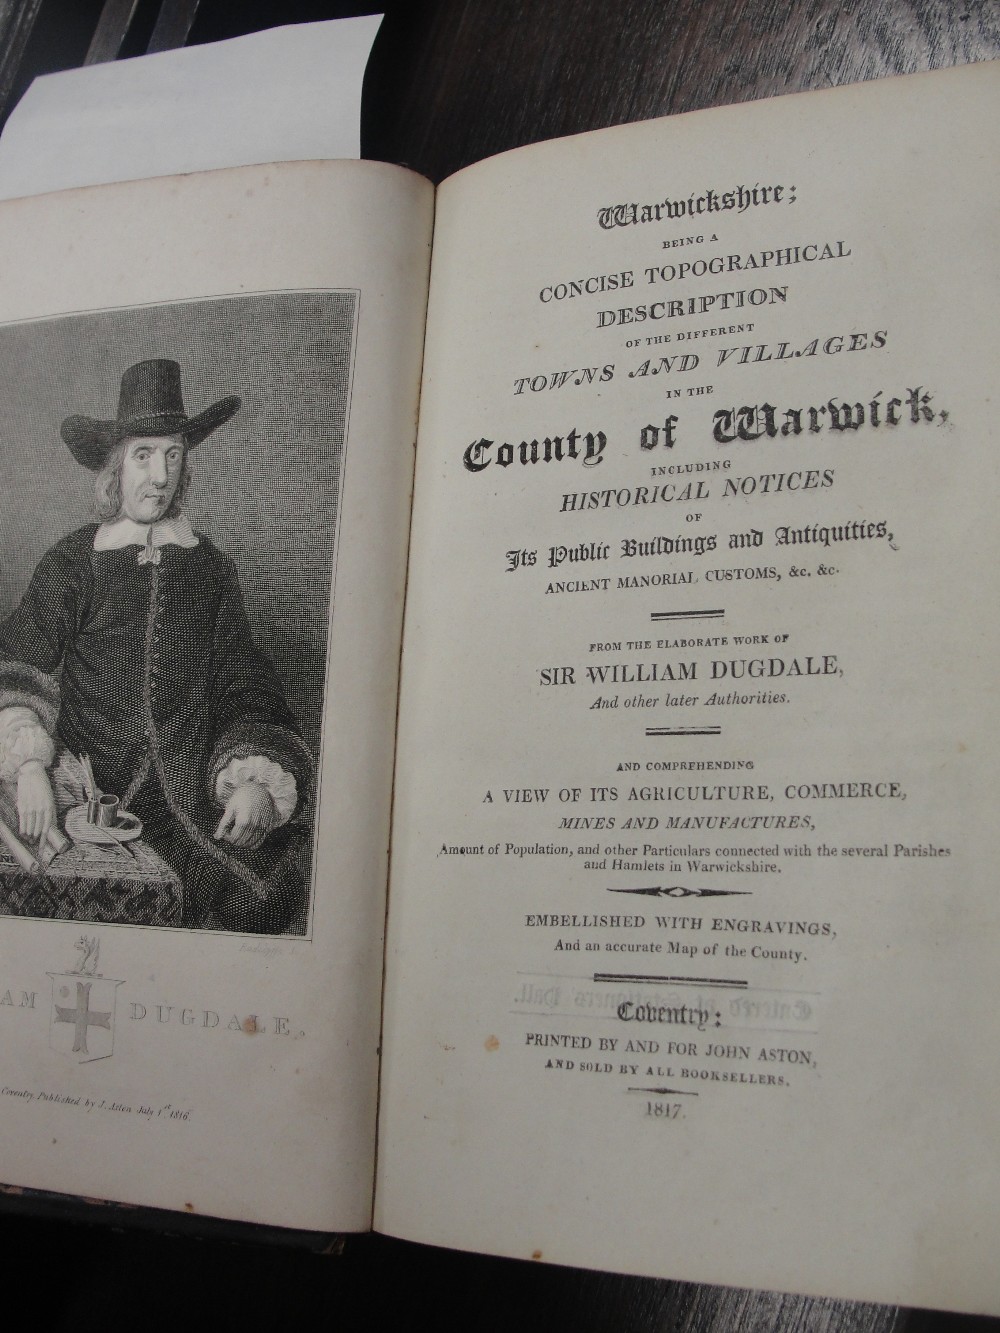 A book entitled "County of Warwickshire" by Sir William Dugdale (1817)